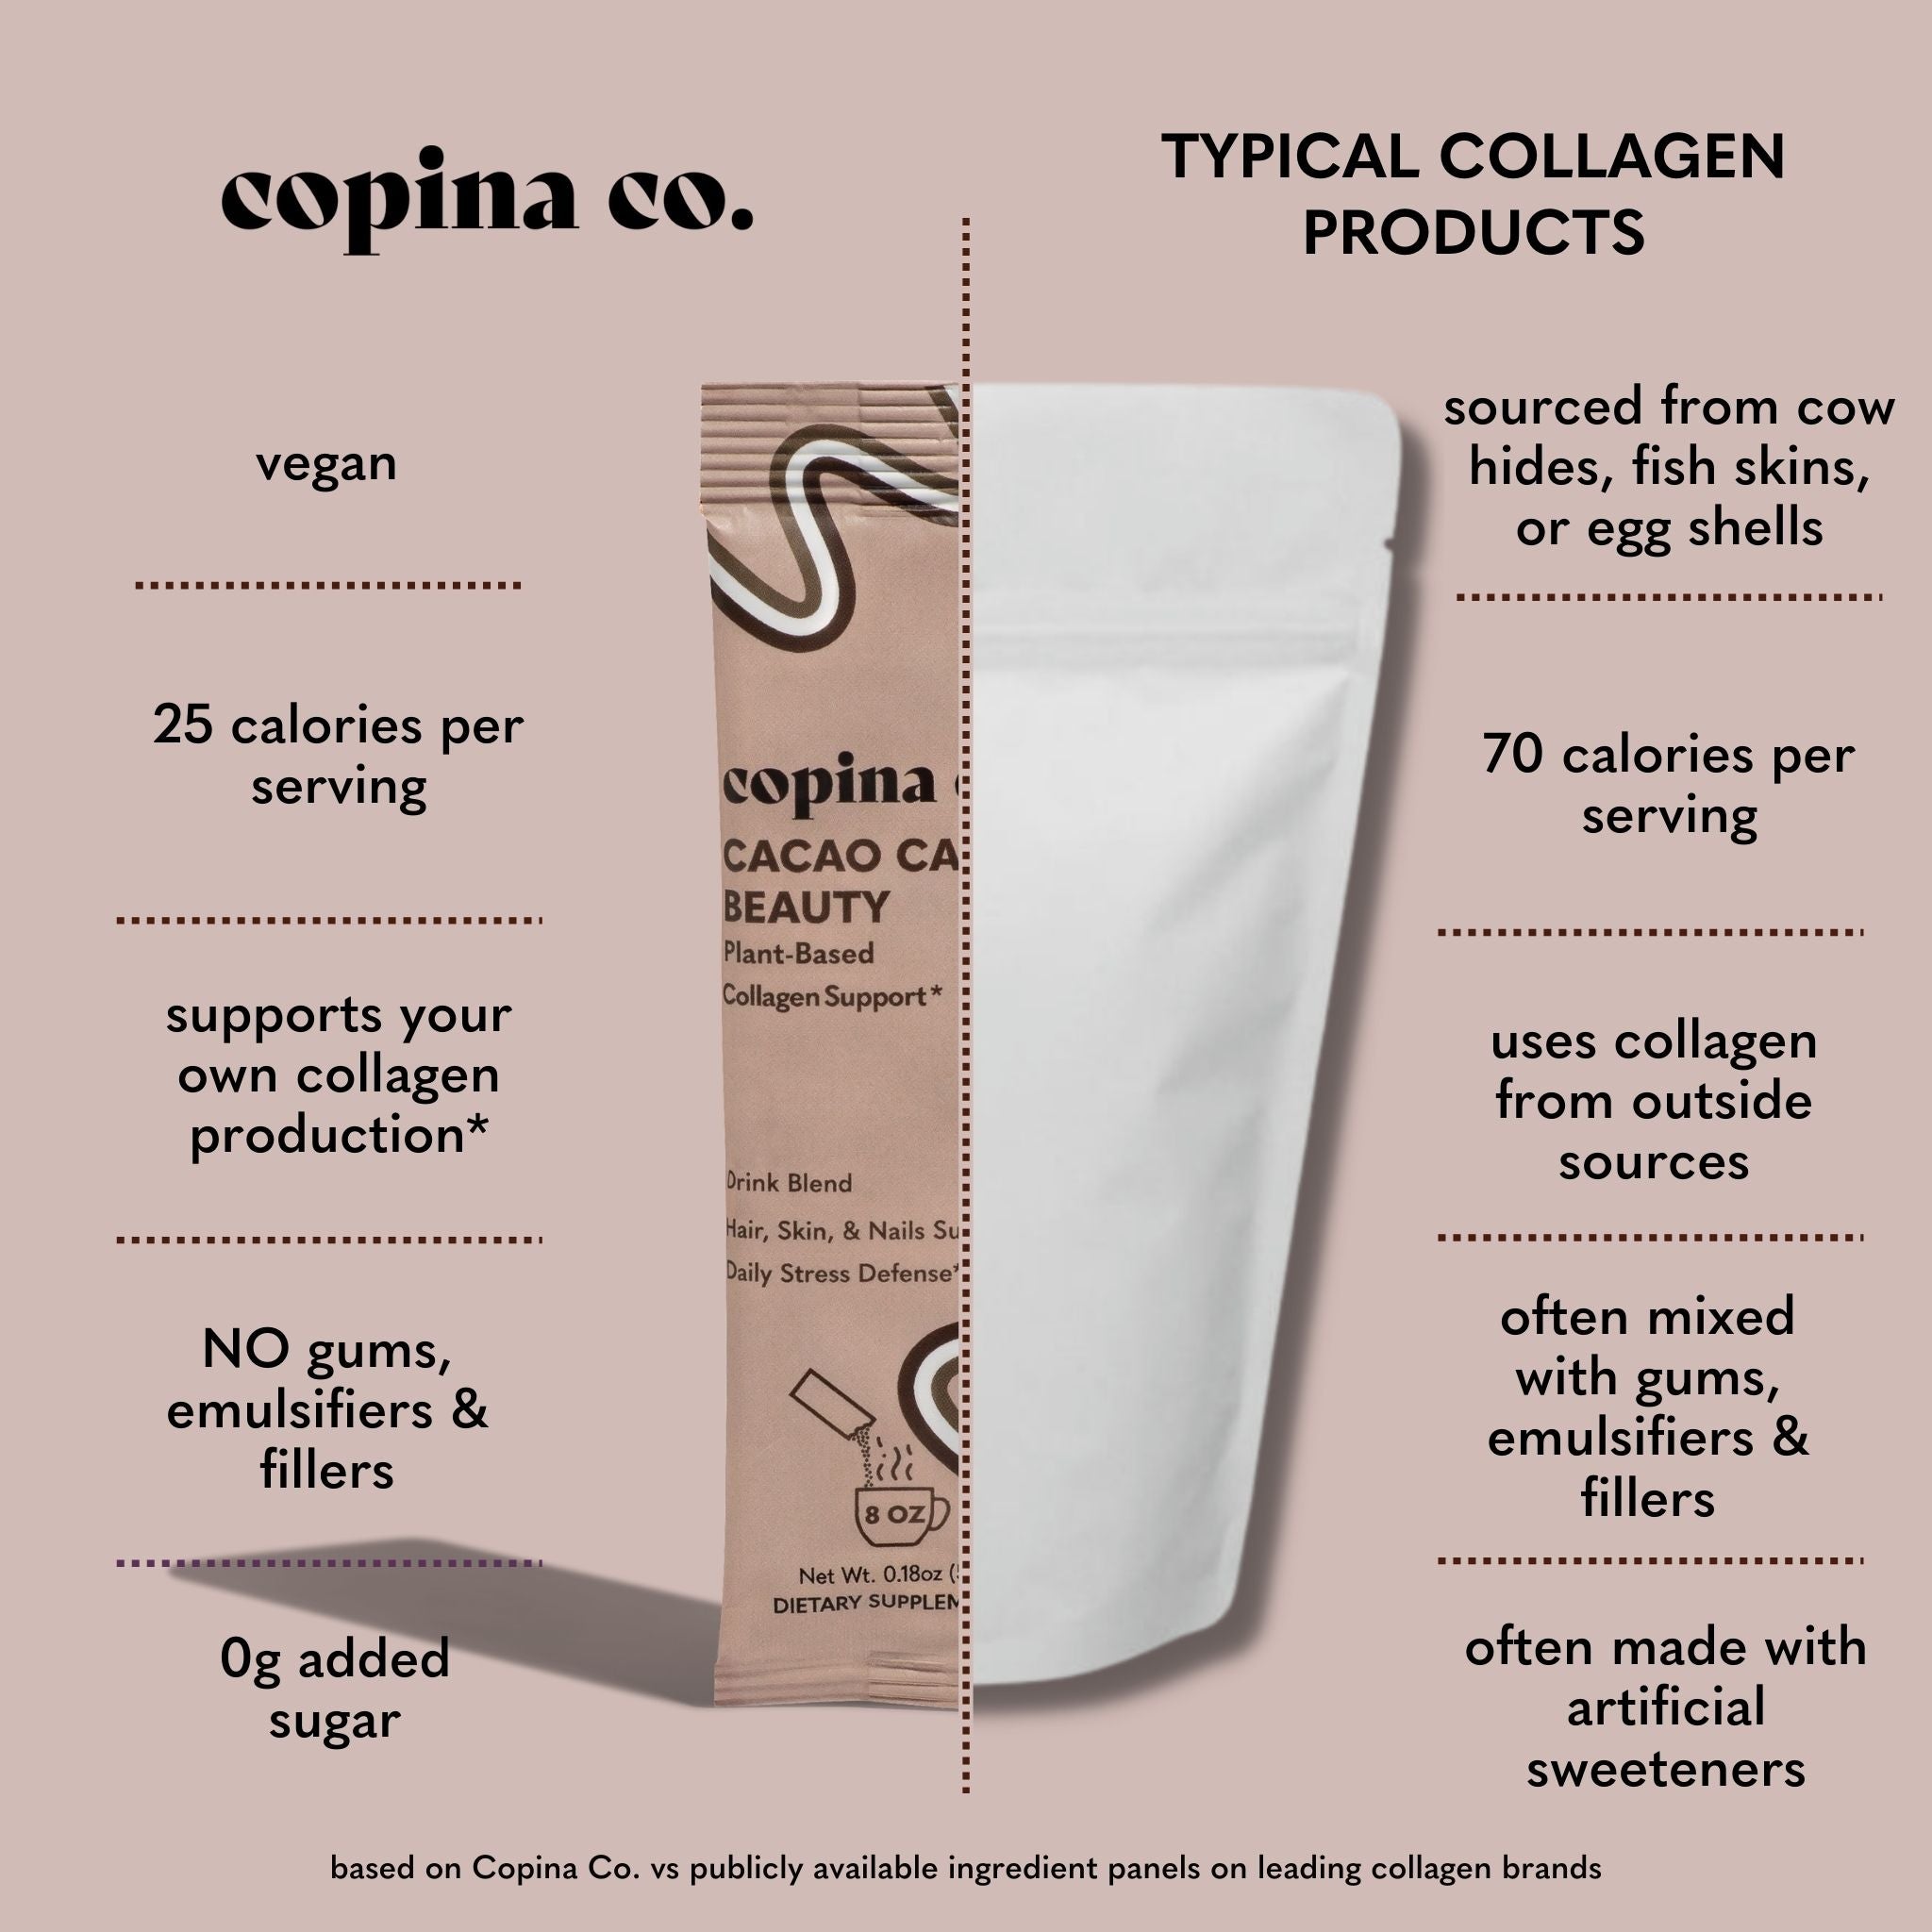 Cacao Calm Beauty Plant-Based Collagen Support Drink Blend Stick Packs - Copina Co. - Consumerhaus